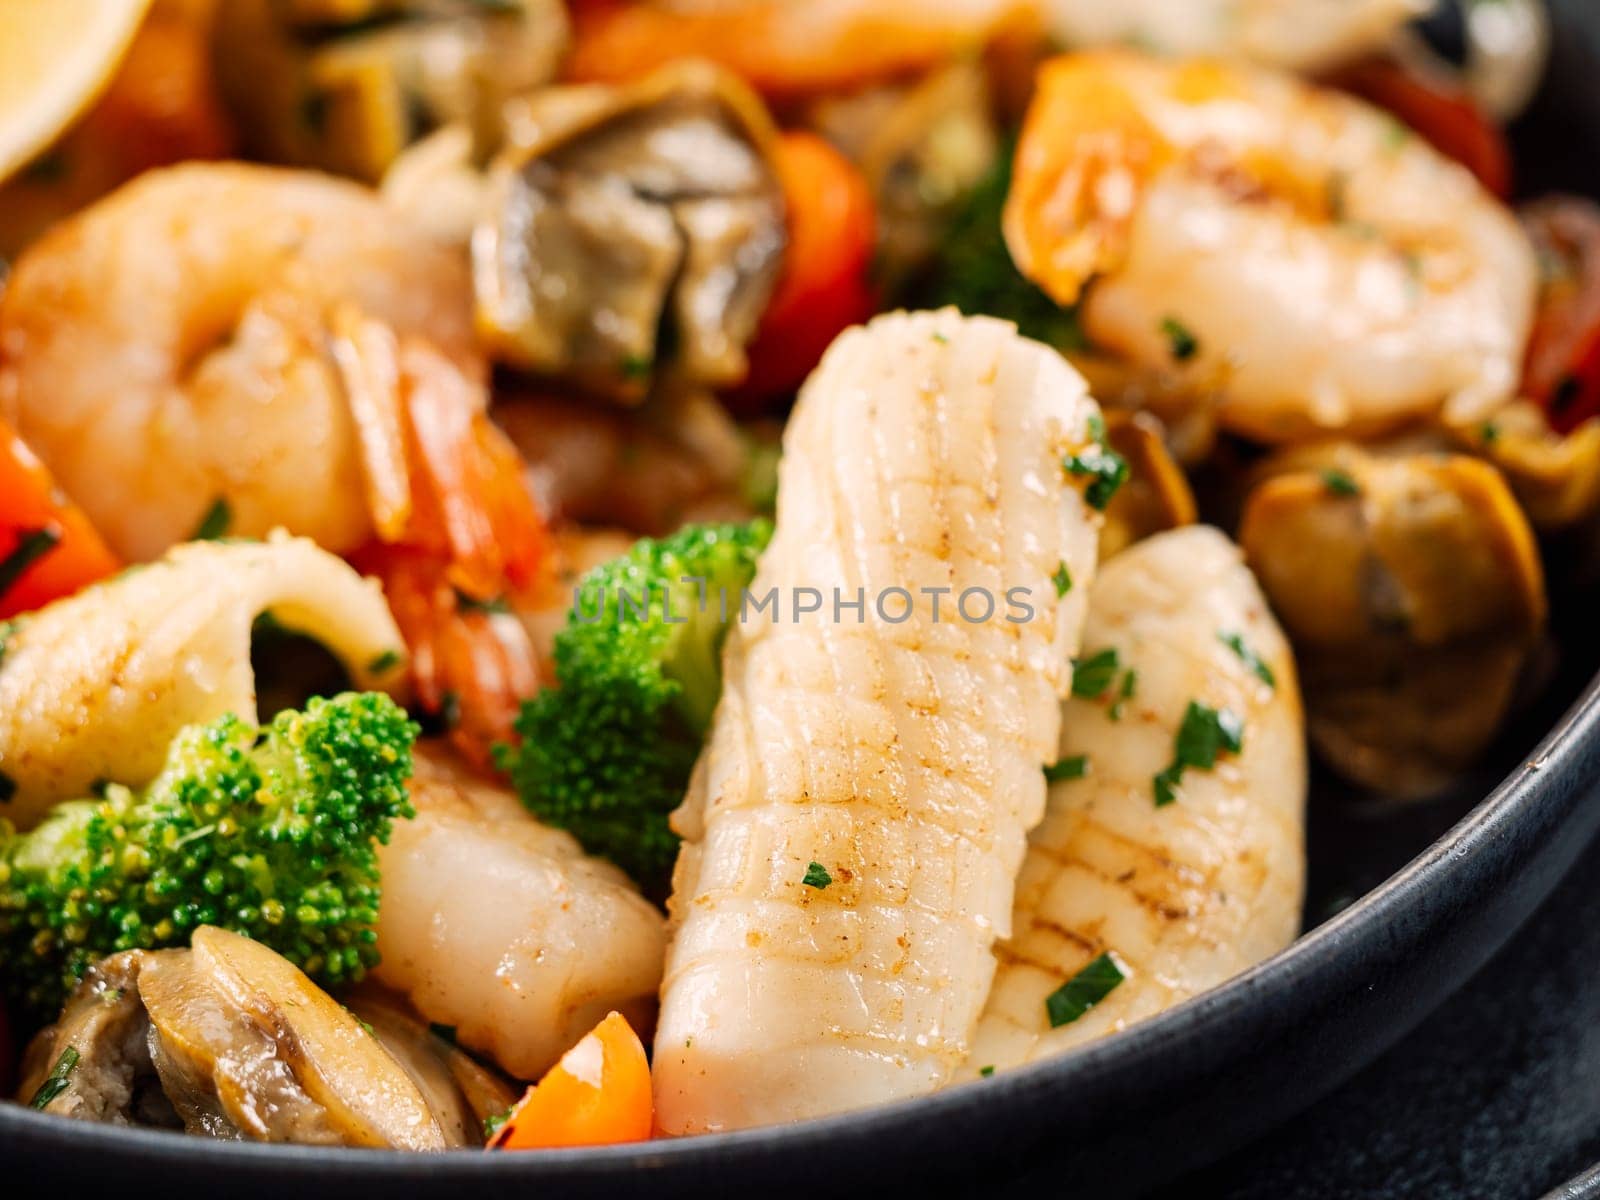 Mixed Seafood Contain Shrimps, Mussels, Calamari Squids and Fish with Broccoli, Cherry Tomato, Lemon on Black dish in restaurant-style platting. Seafood salad on dark background